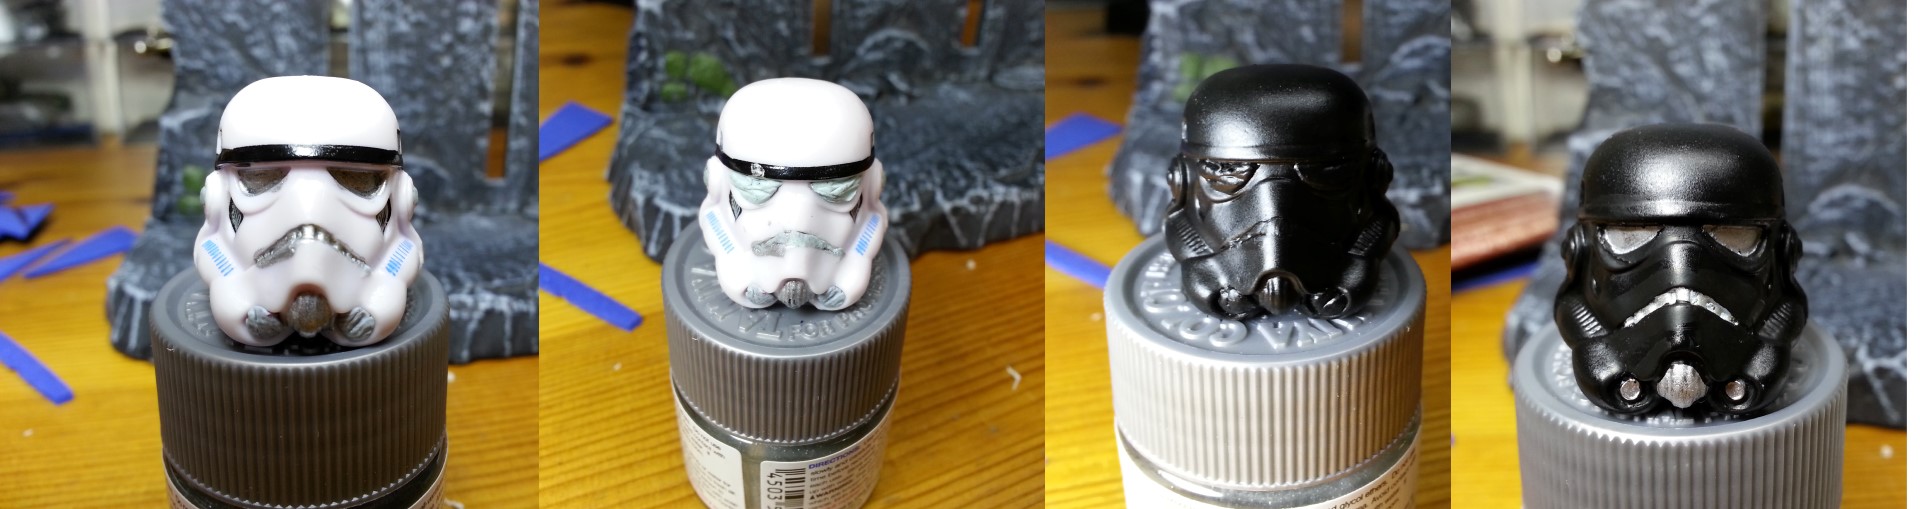 Evolution of the StormTrooper Helmet. I used Bluetack to mask the eyes for painting.